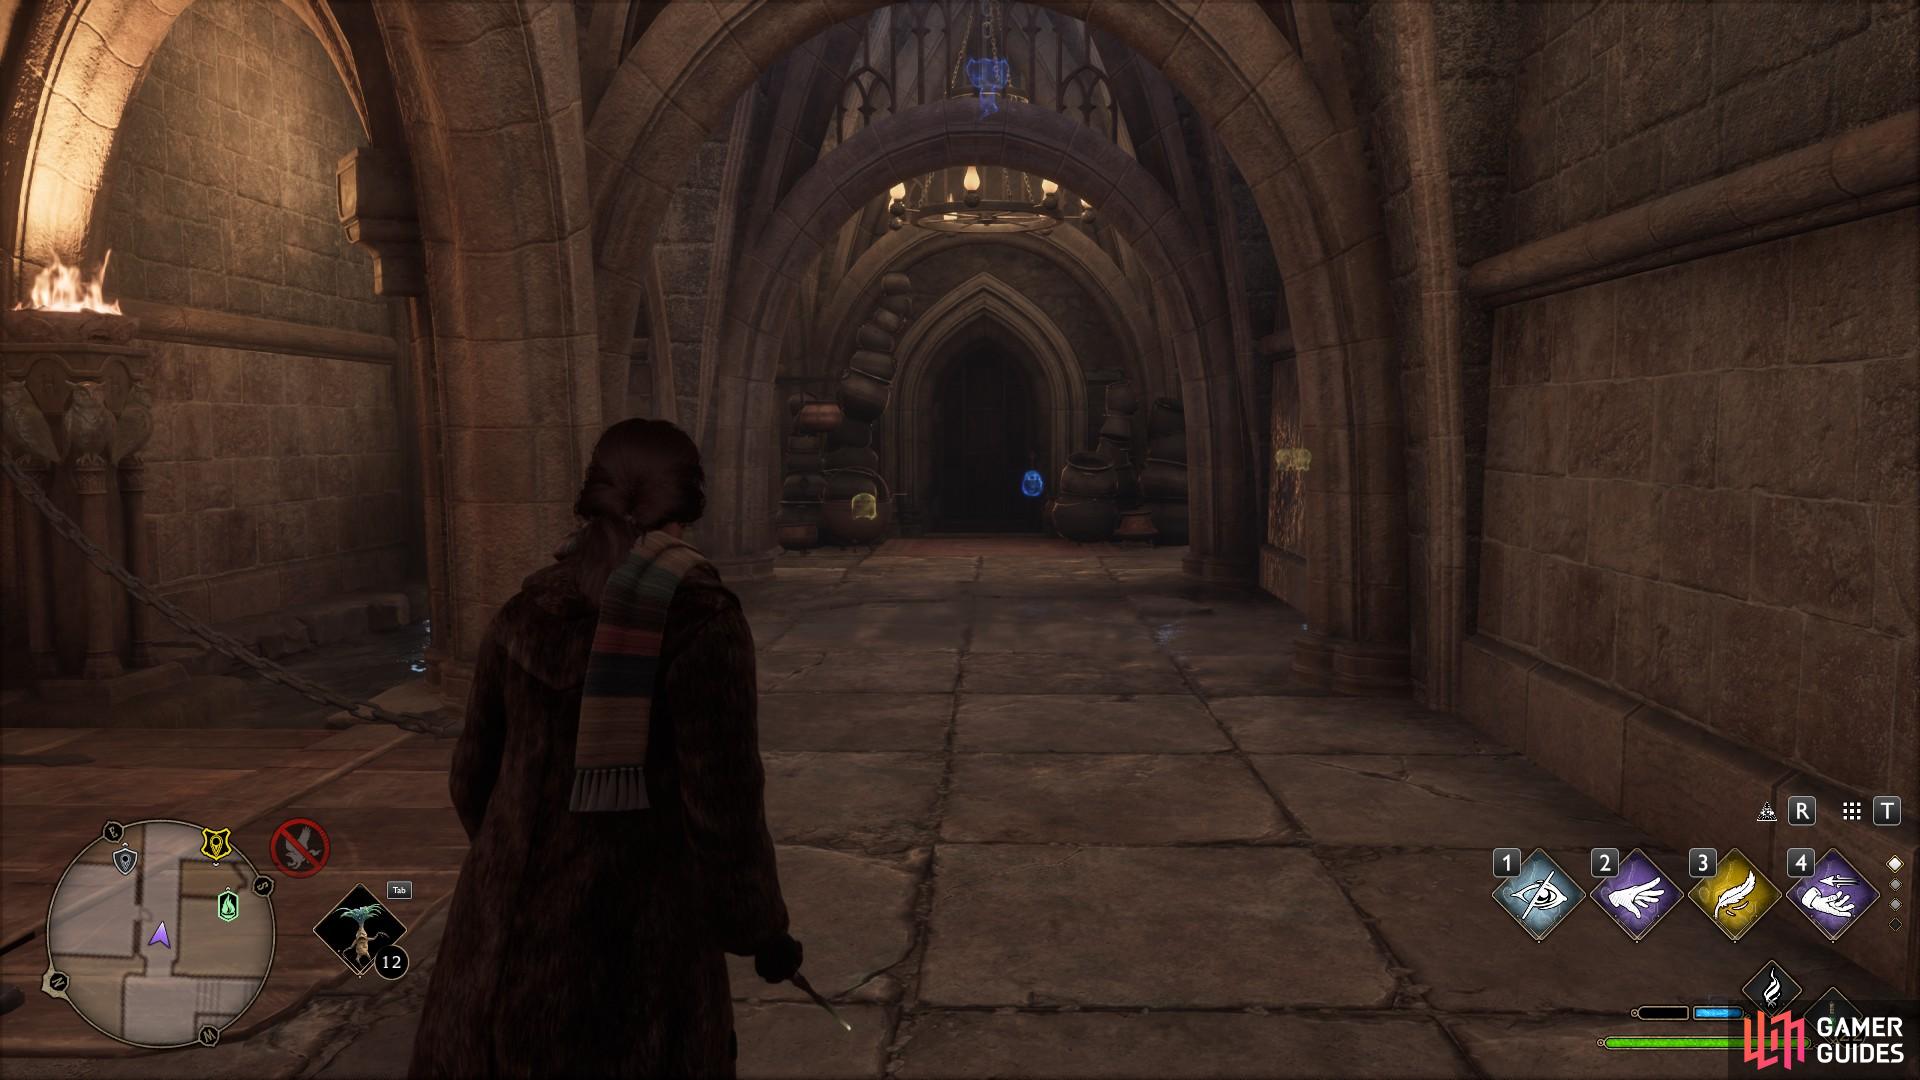 Head into the dungeons via the Bell Tower stairs to find the potions room.